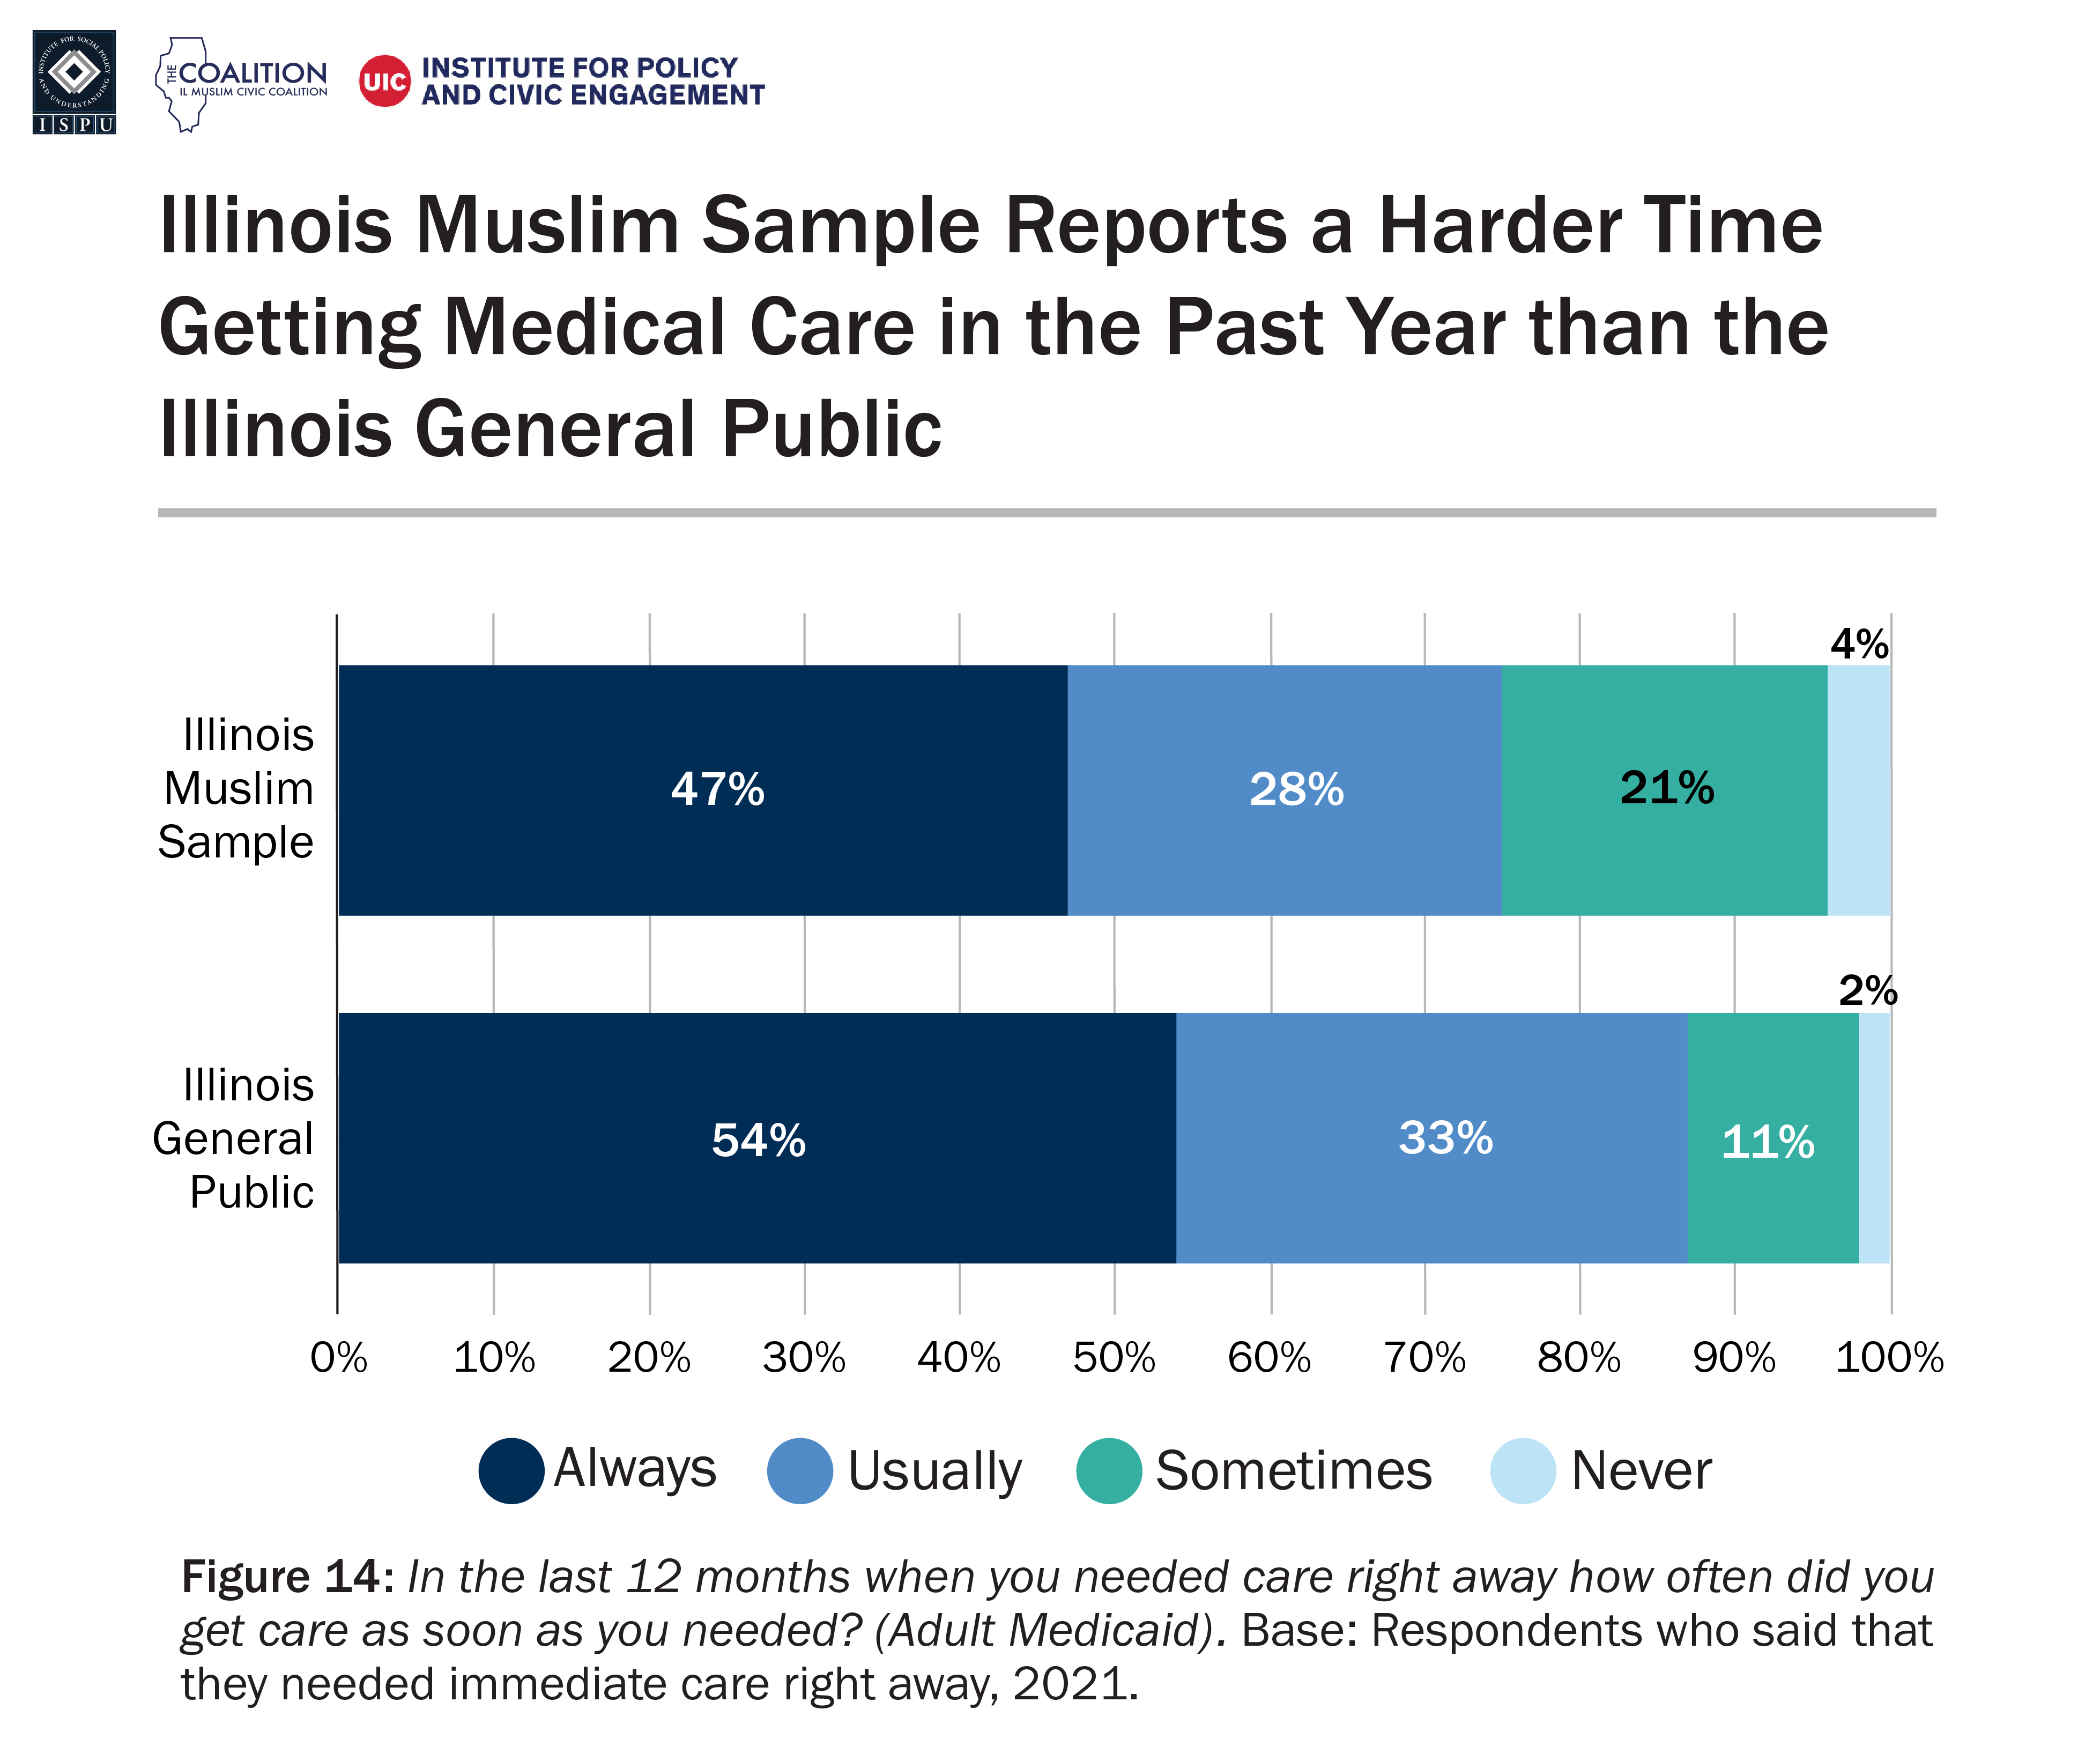 A bar graph showing the frequency of getting medical care when needed among the Illinois Muslim sample and Illinois general public